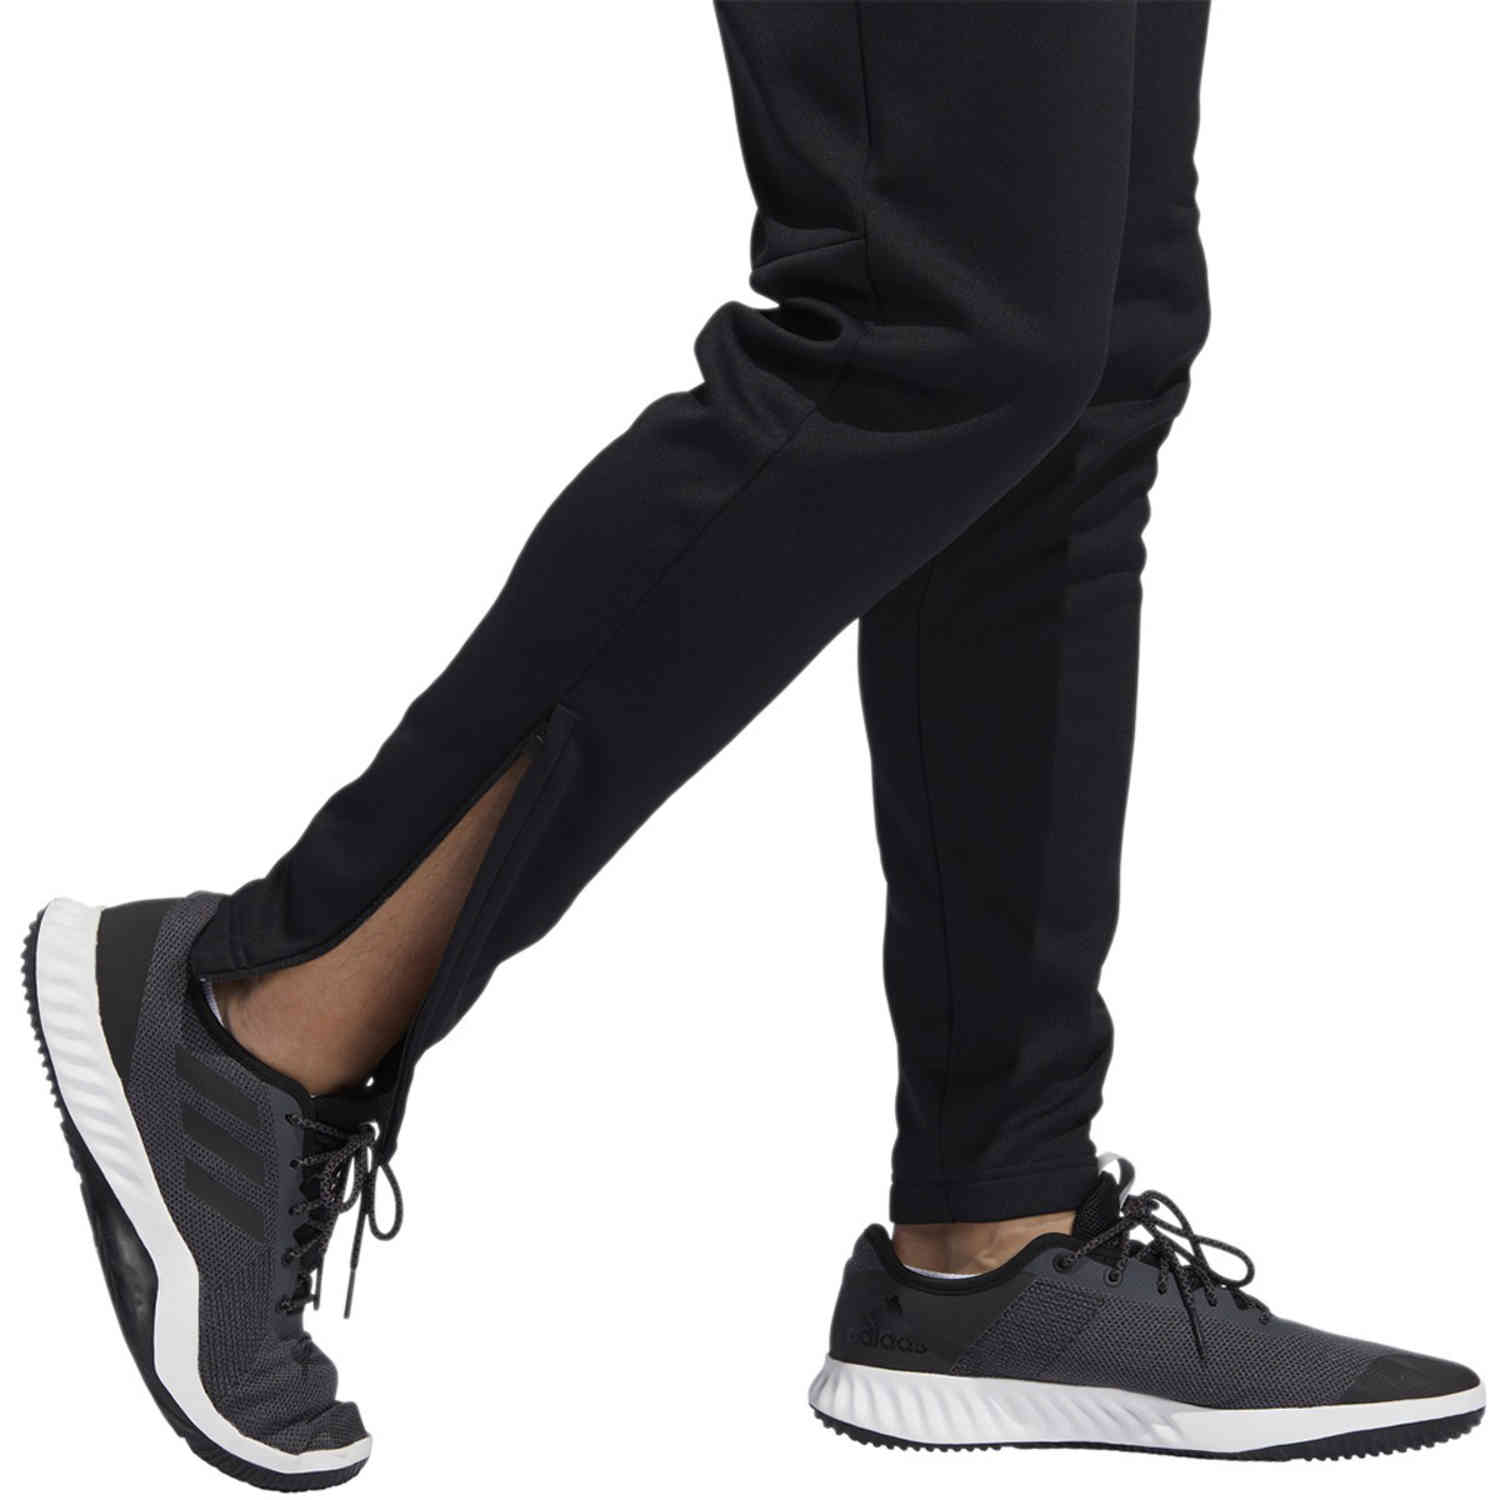 adidas Team Issue Lifestyle Tapered Pants - Black/white - SoccerPro